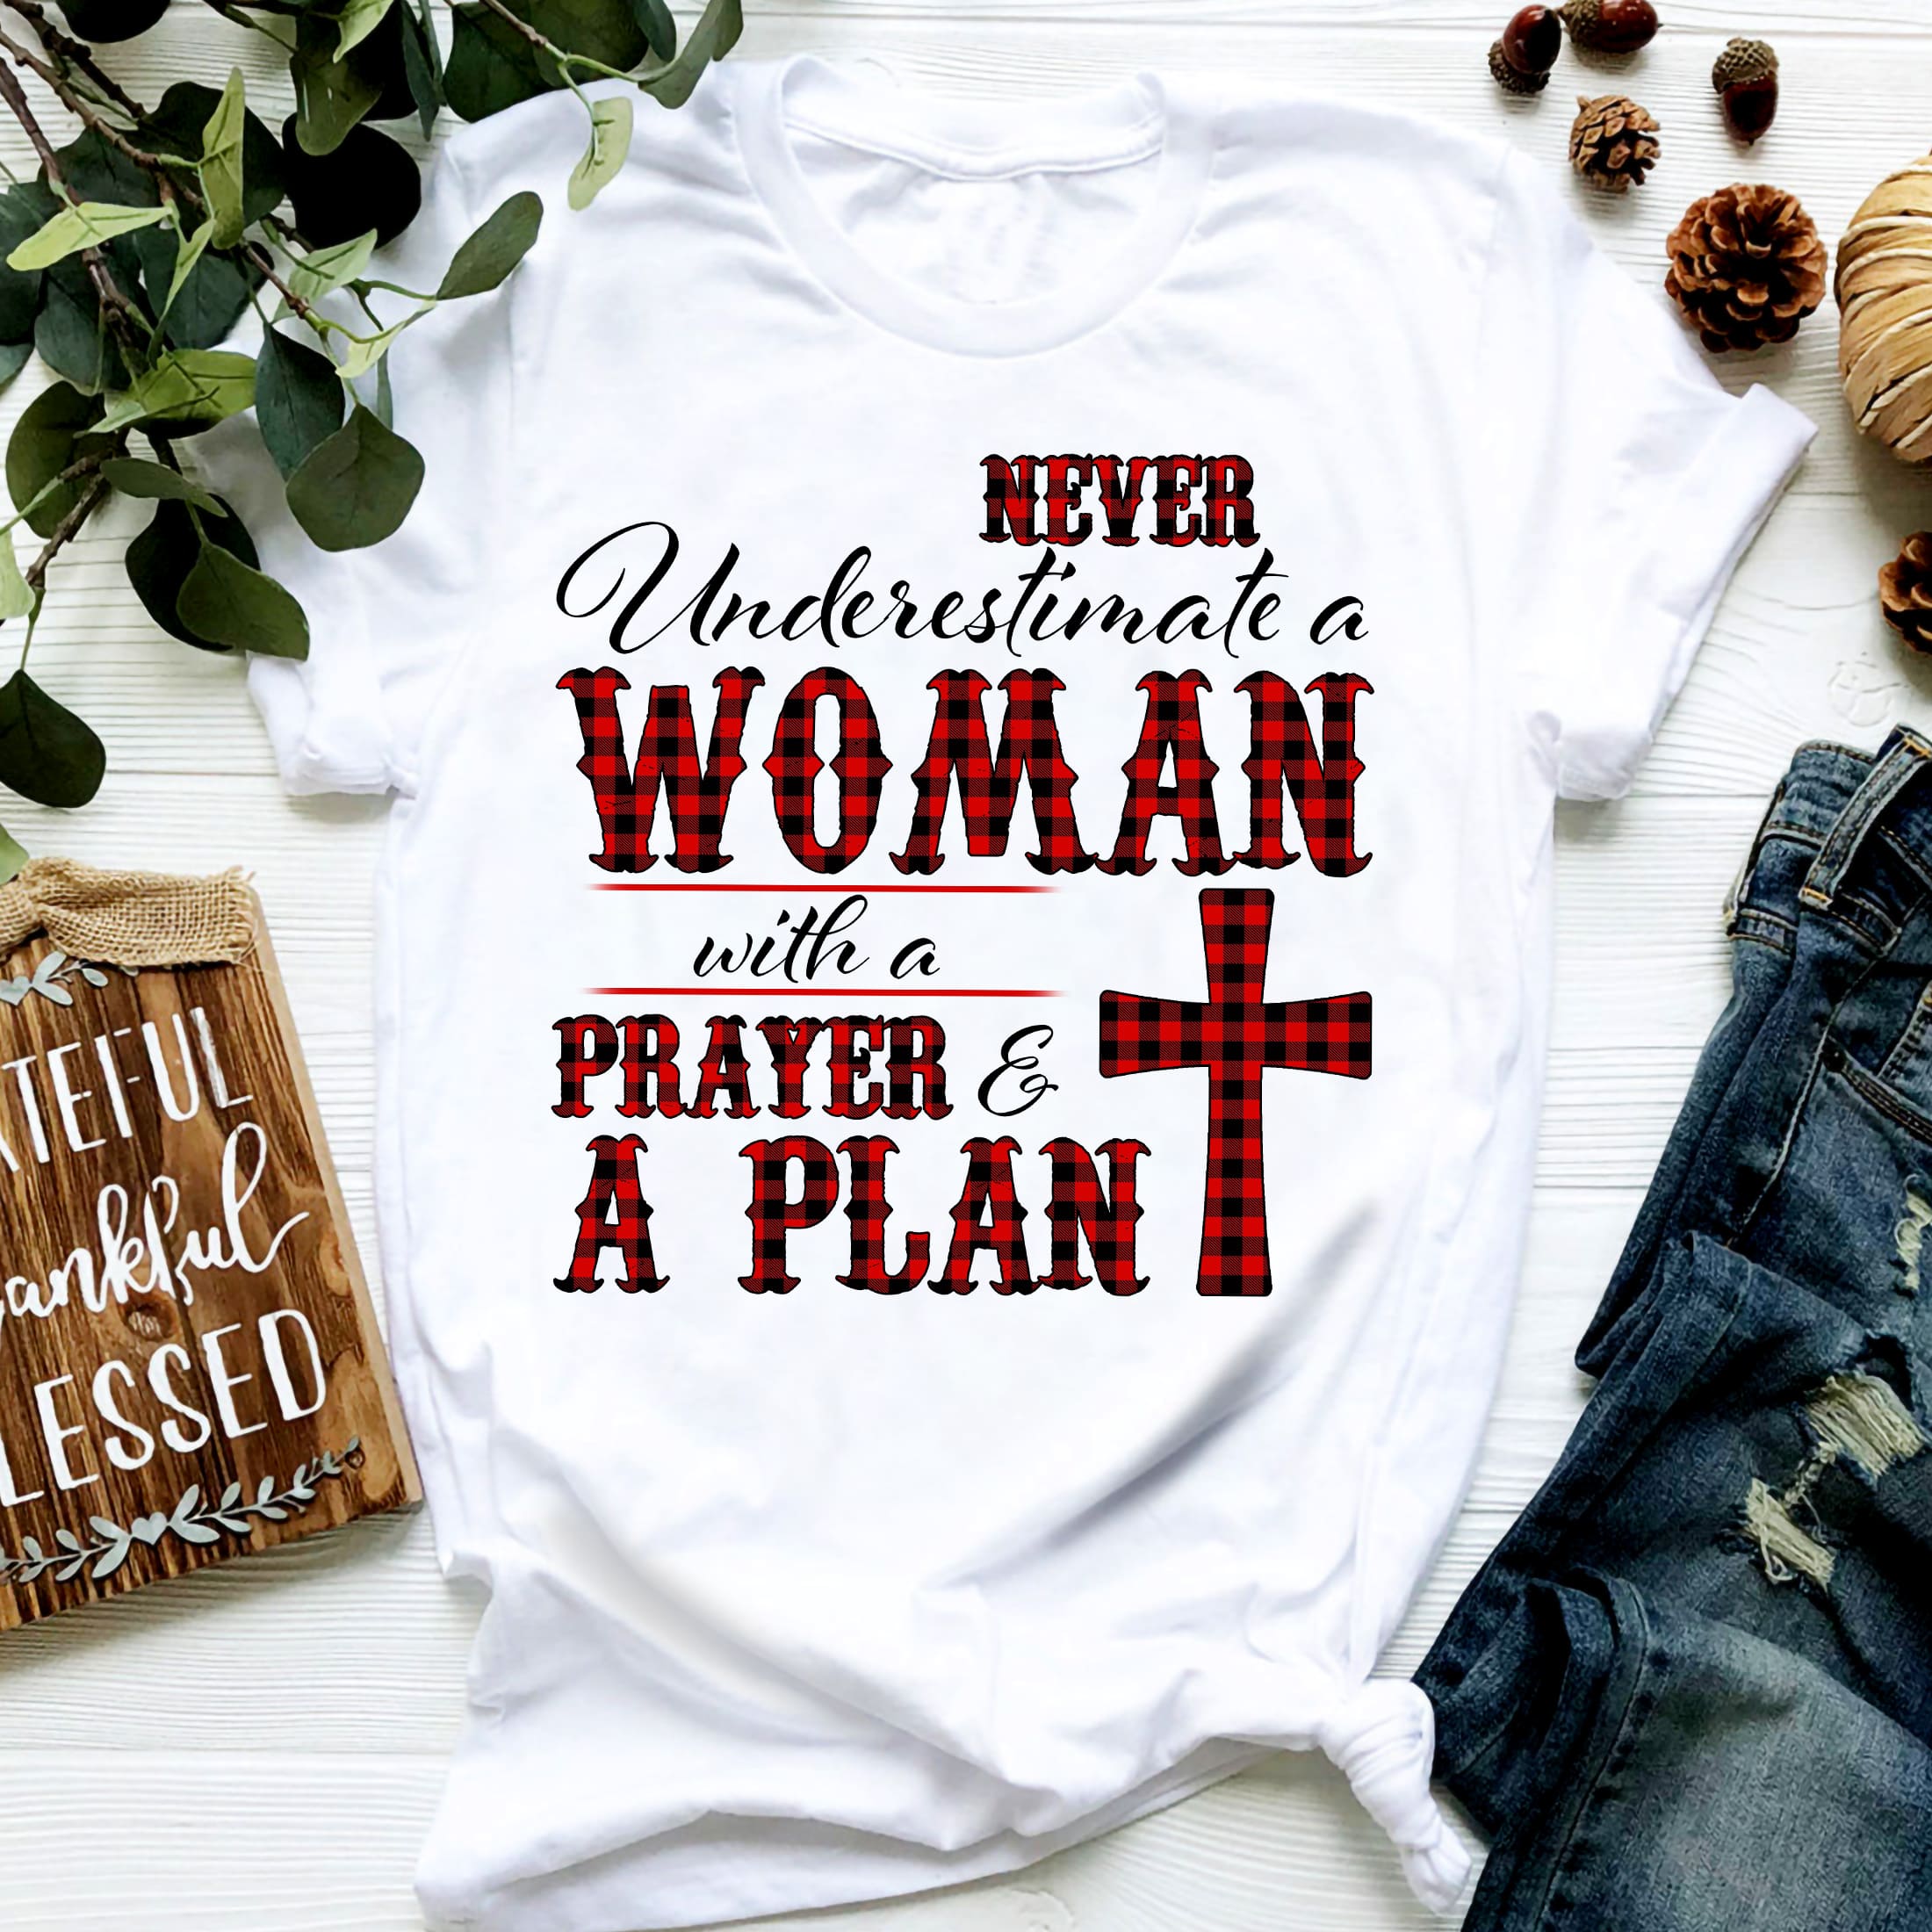 Never underestimate a woman with a prayer & a plan – Jesus T Shirt